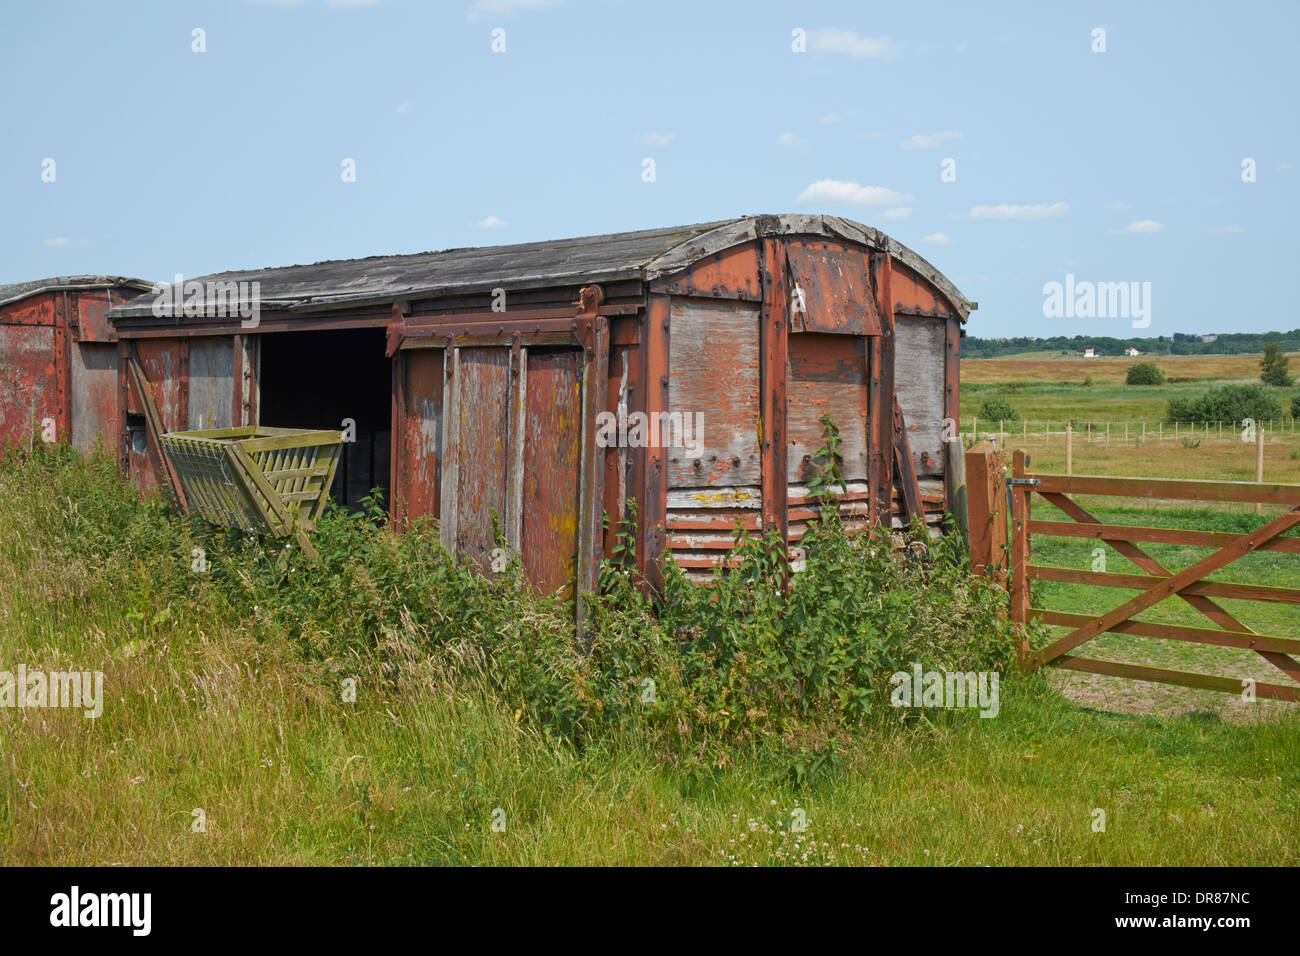 Old railway rolling stock used for agricultural storage. Walberswick, Suffolk, England. Stock Photo